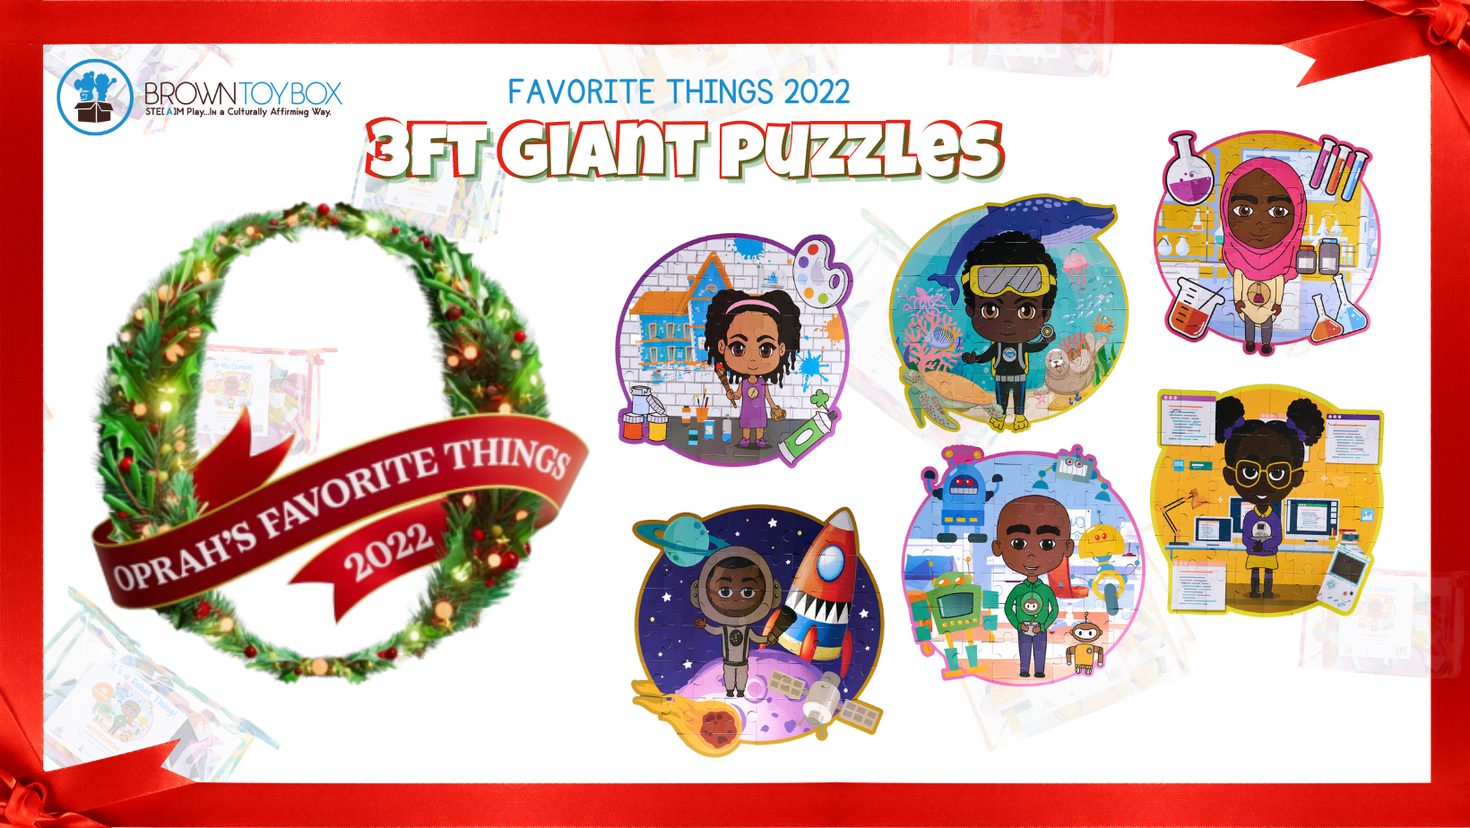 ACE Client Brown Toy Box Reaches New Heights with Inclusion on Oprah’s Favorite Things List for the 2022 Holidays